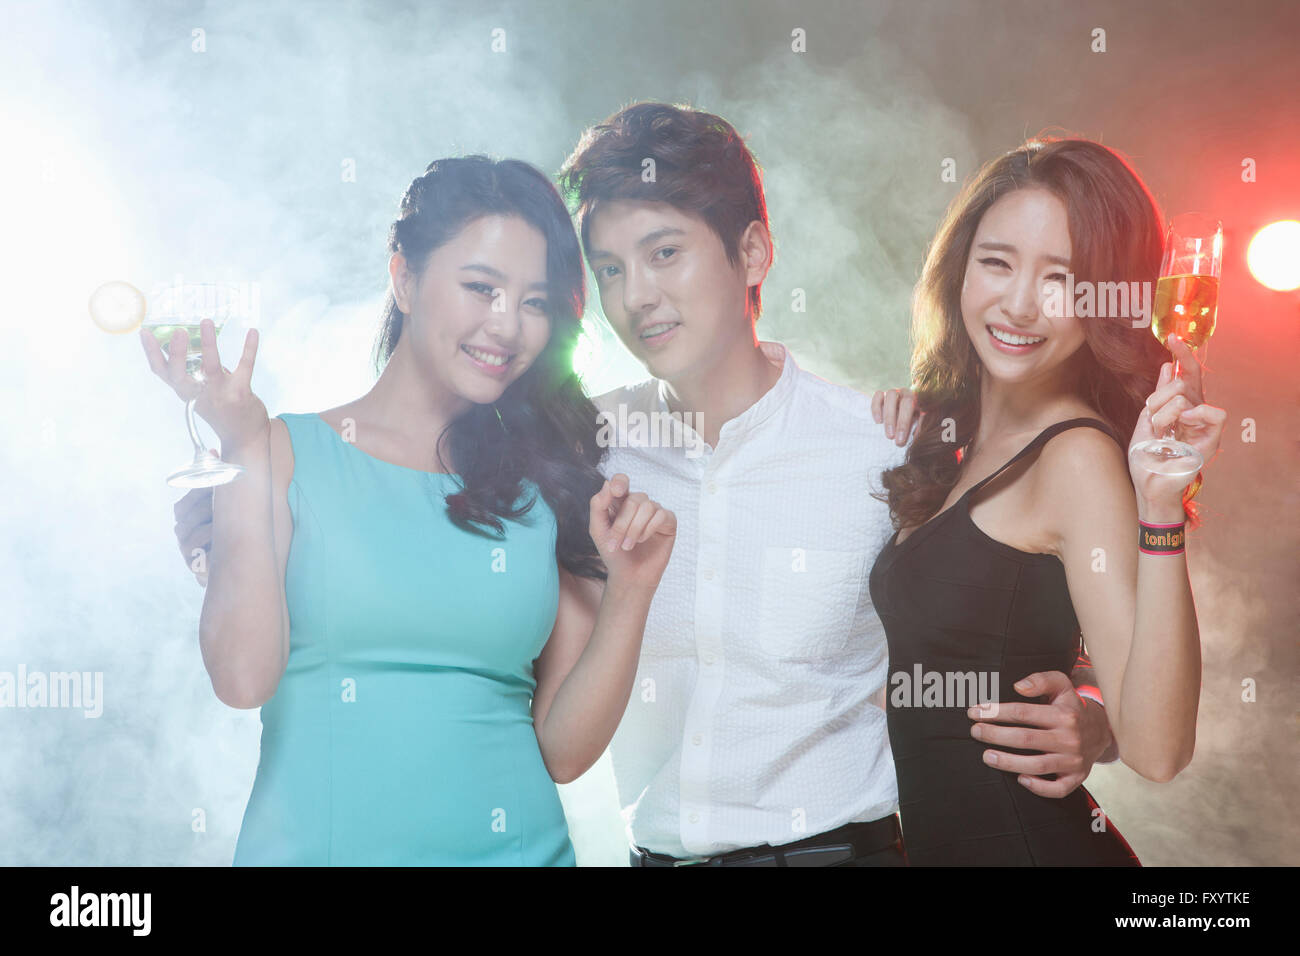 Portrait of three young smiling people posing with drinks at nightclub staring at front Stock Photo